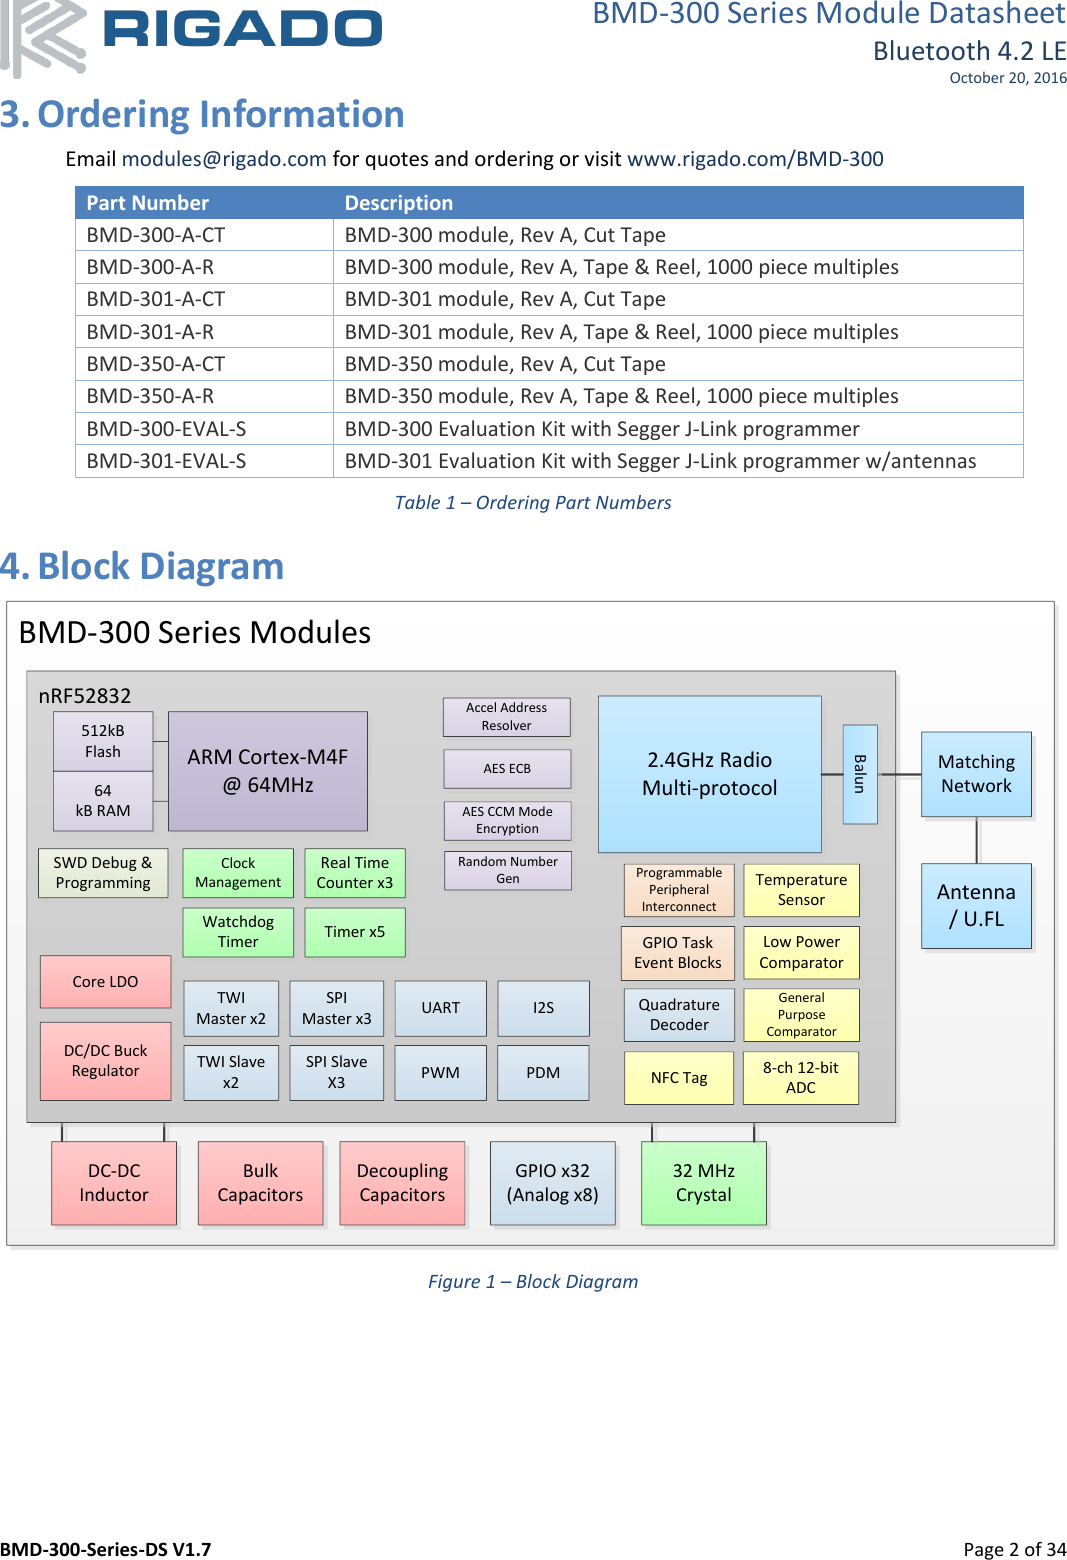 BMD-300 Series Module Datasheet Bluetooth 4.2 LE October 20, 2016 BMD-300-Series-DS V1.7         Page 2 of 34 3. Ordering Information Email modules@rigado.com for quotes and ordering or visit www.rigado.com/BMD-300 Part Number Description BMD-300-A-CT BMD-300 module, Rev A, Cut Tape BMD-300-A-R BMD-300 module, Rev A, Tape &amp; Reel, 1000 piece multiples BMD-301-A-CT BMD-301 module, Rev A, Cut Tape BMD-301-A-R BMD-301 module, Rev A, Tape &amp; Reel, 1000 piece multiples BMD-350-A-CT BMD-350 module, Rev A, Cut Tape BMD-350-A-R BMD-350 module, Rev A, Tape &amp; Reel, 1000 piece multiples BMD-300-EVAL-S BMD-300 Evaluation Kit with Segger J-Link programmer BMD-301-EVAL-S BMD-301 Evaluation Kit with Segger J-Link programmer w/antennas Table 1 – Ordering Part Numbers 4. Block Diagram BMD-300 Series Modules32 MHz CrystalnRF52832512kB FlashDC-DC InductorDecoupling CapacitorsBulk Capacitors2.4GHz RadioMulti-protocolTWI Master x2SPI Master x3SPI SlaveX3DC/DC Buck RegulatorCore LDO64kB RAMLow Power Comparator8-ch 12-bit ADCUART Quadrature DecoderSWD Debug &amp; Programming  Temperature SensorClock ManagementWatchdog TimerRandom Number GenTimer x5Accel Address ResolverAES CCM Mode EncryptionAES ECBReal Time Counter x3GPIO Task Event BlocksProgrammable Peripheral InterconnectARM Cortex-M4F@ 64MHz Matching NetworkAntenna / U.FLGPIO x32(Analog x8)I2STWI Slave x2 PWM PDMGeneral Purpose ComparatorNFC TagBalun Figure 1 – Block Diagram    